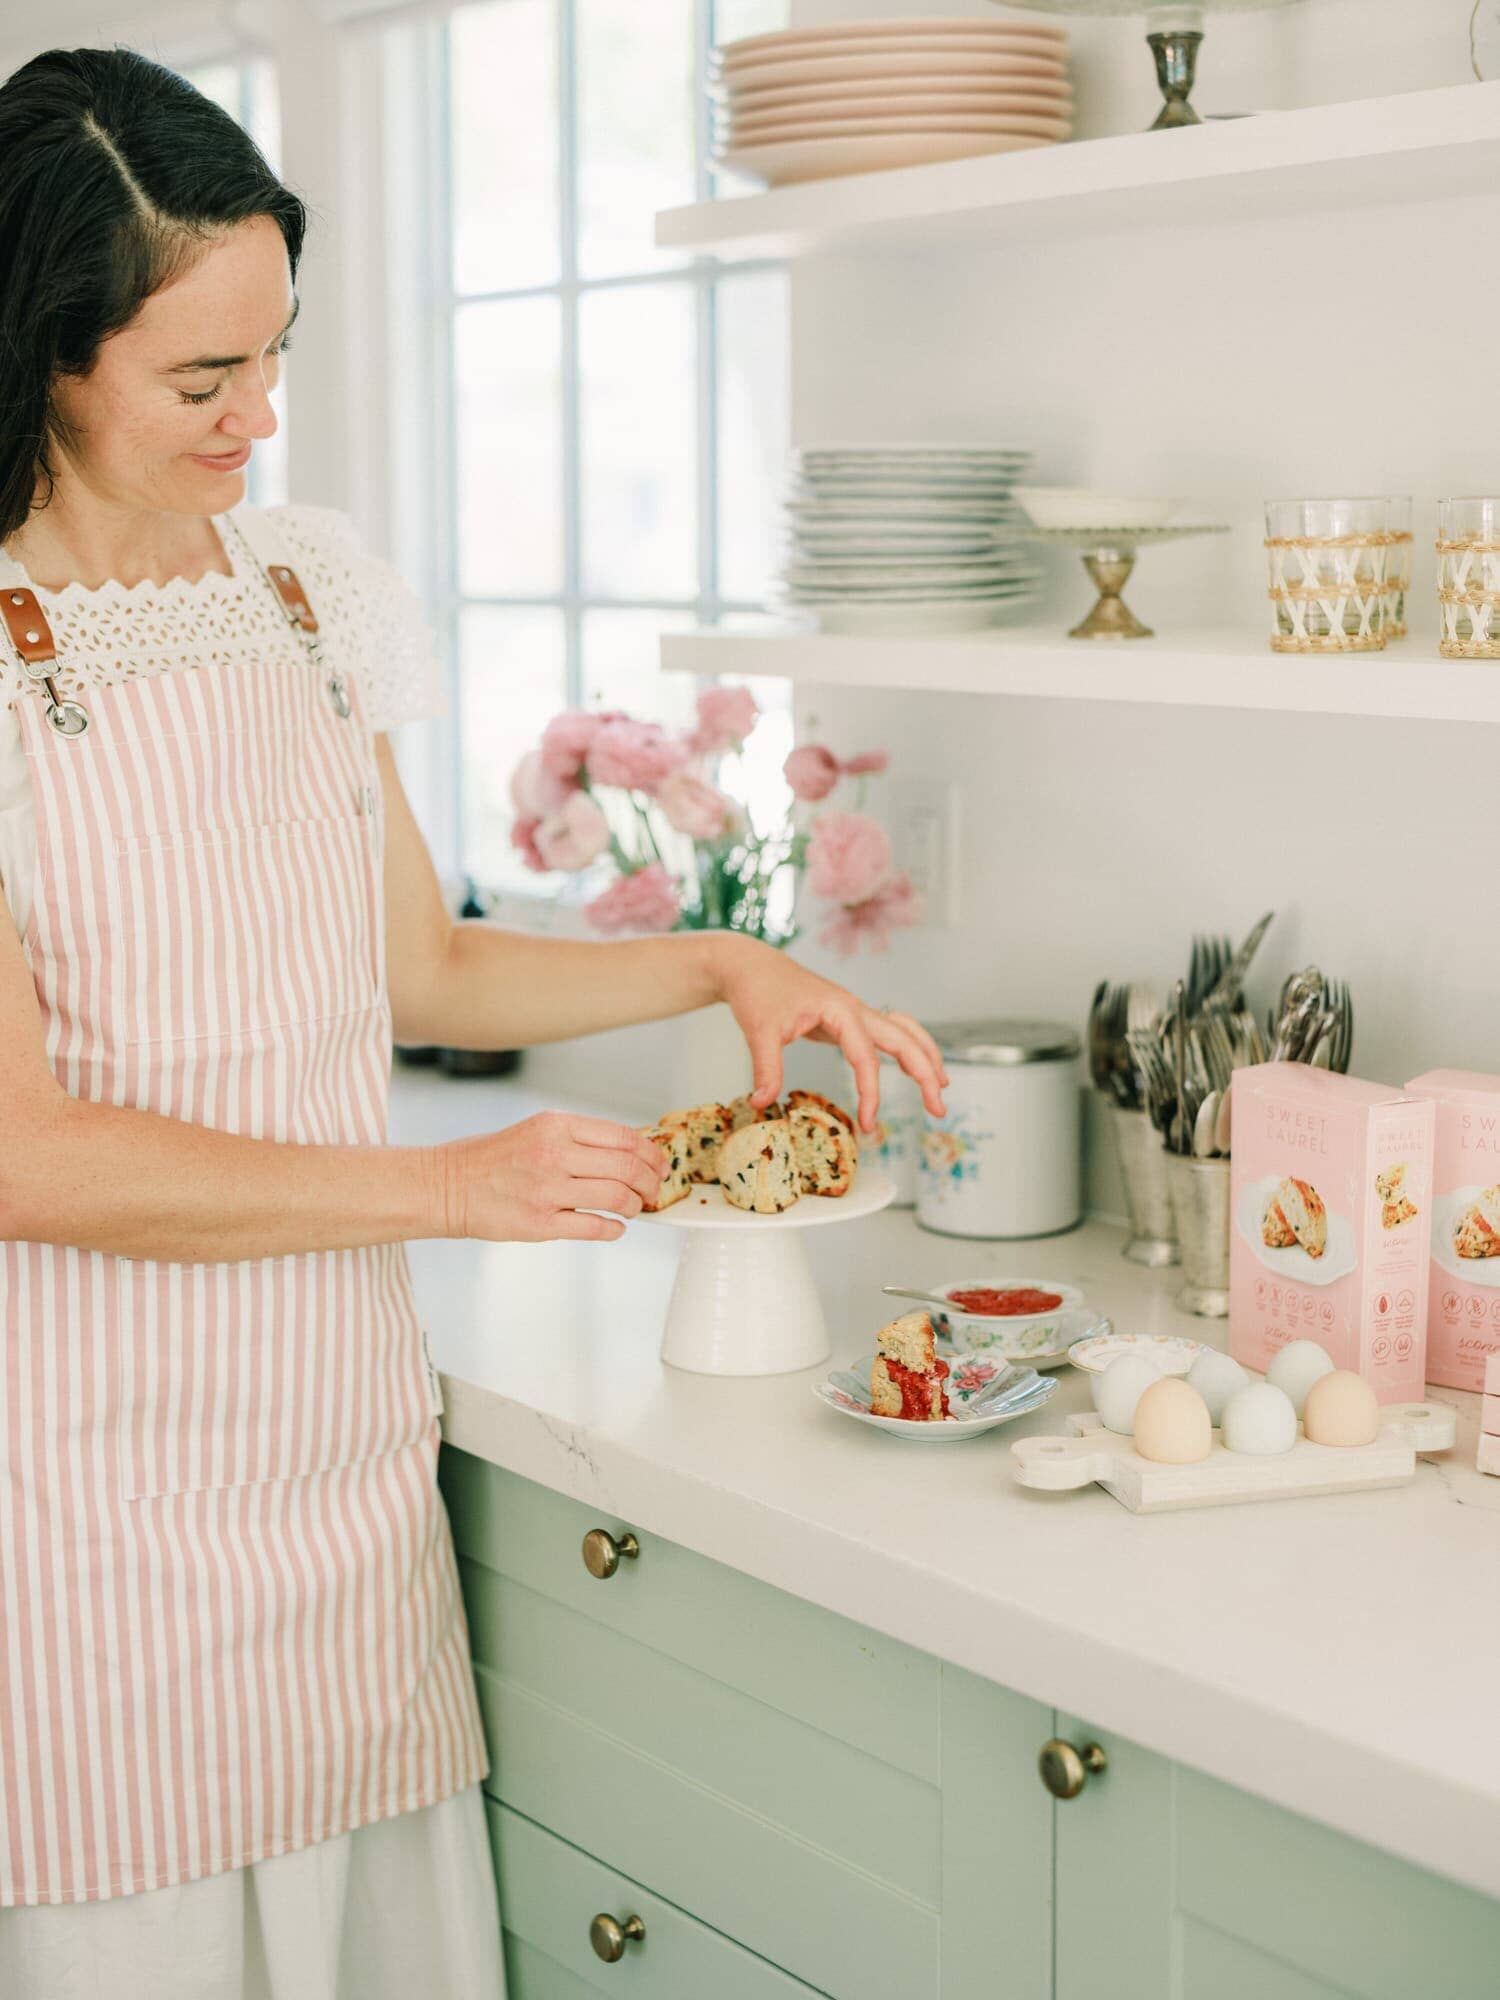 cook in the kitchen wearing pink apron